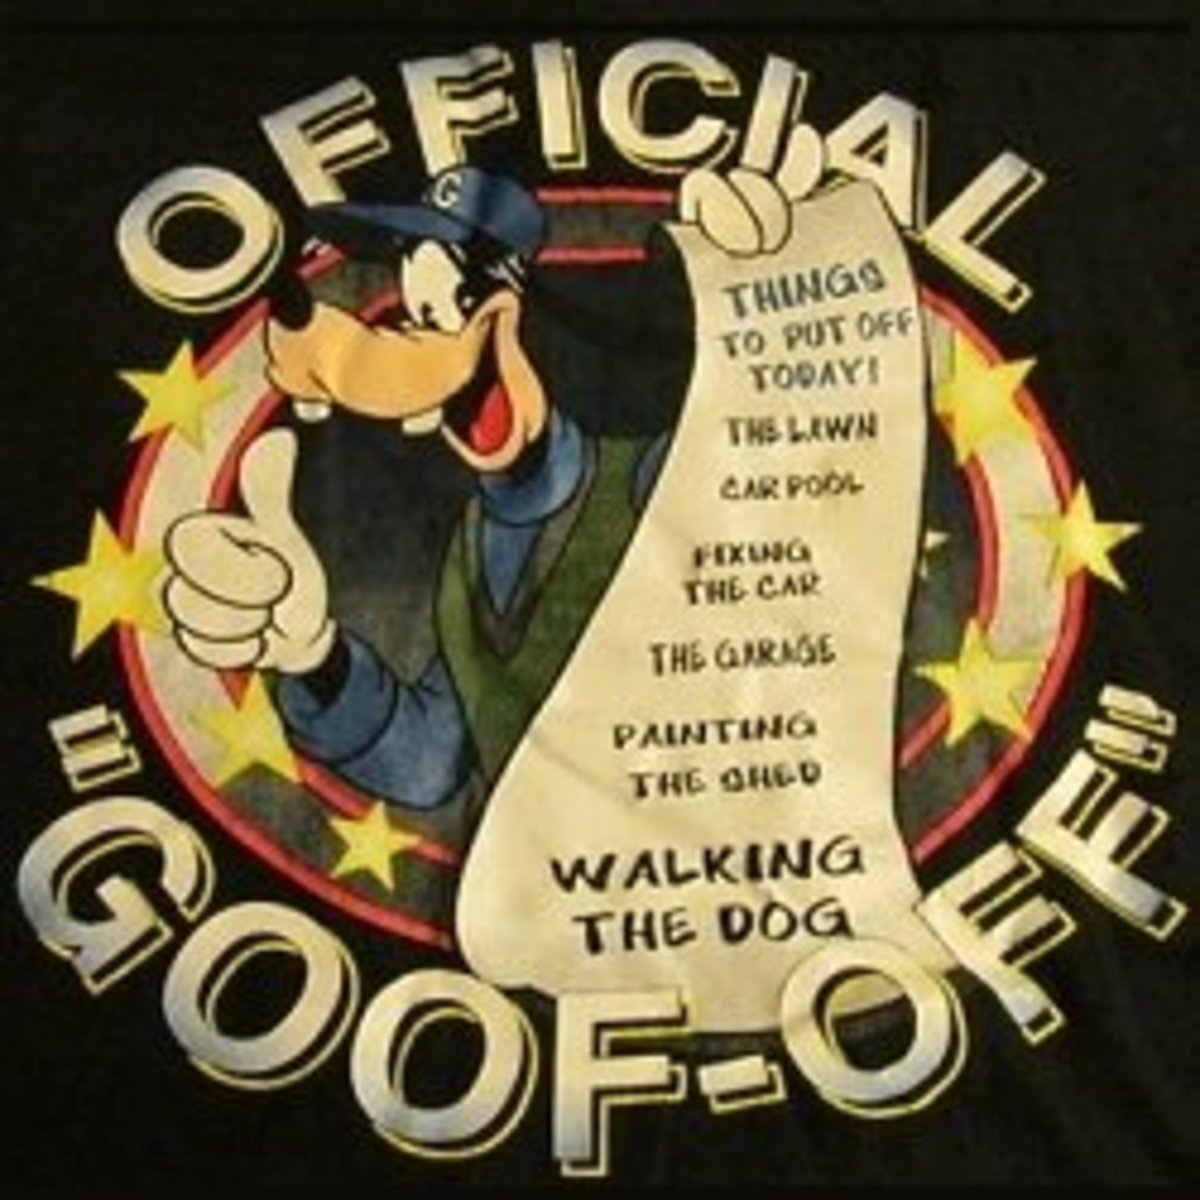 Celebrate National Goof-off Day on March 22nd